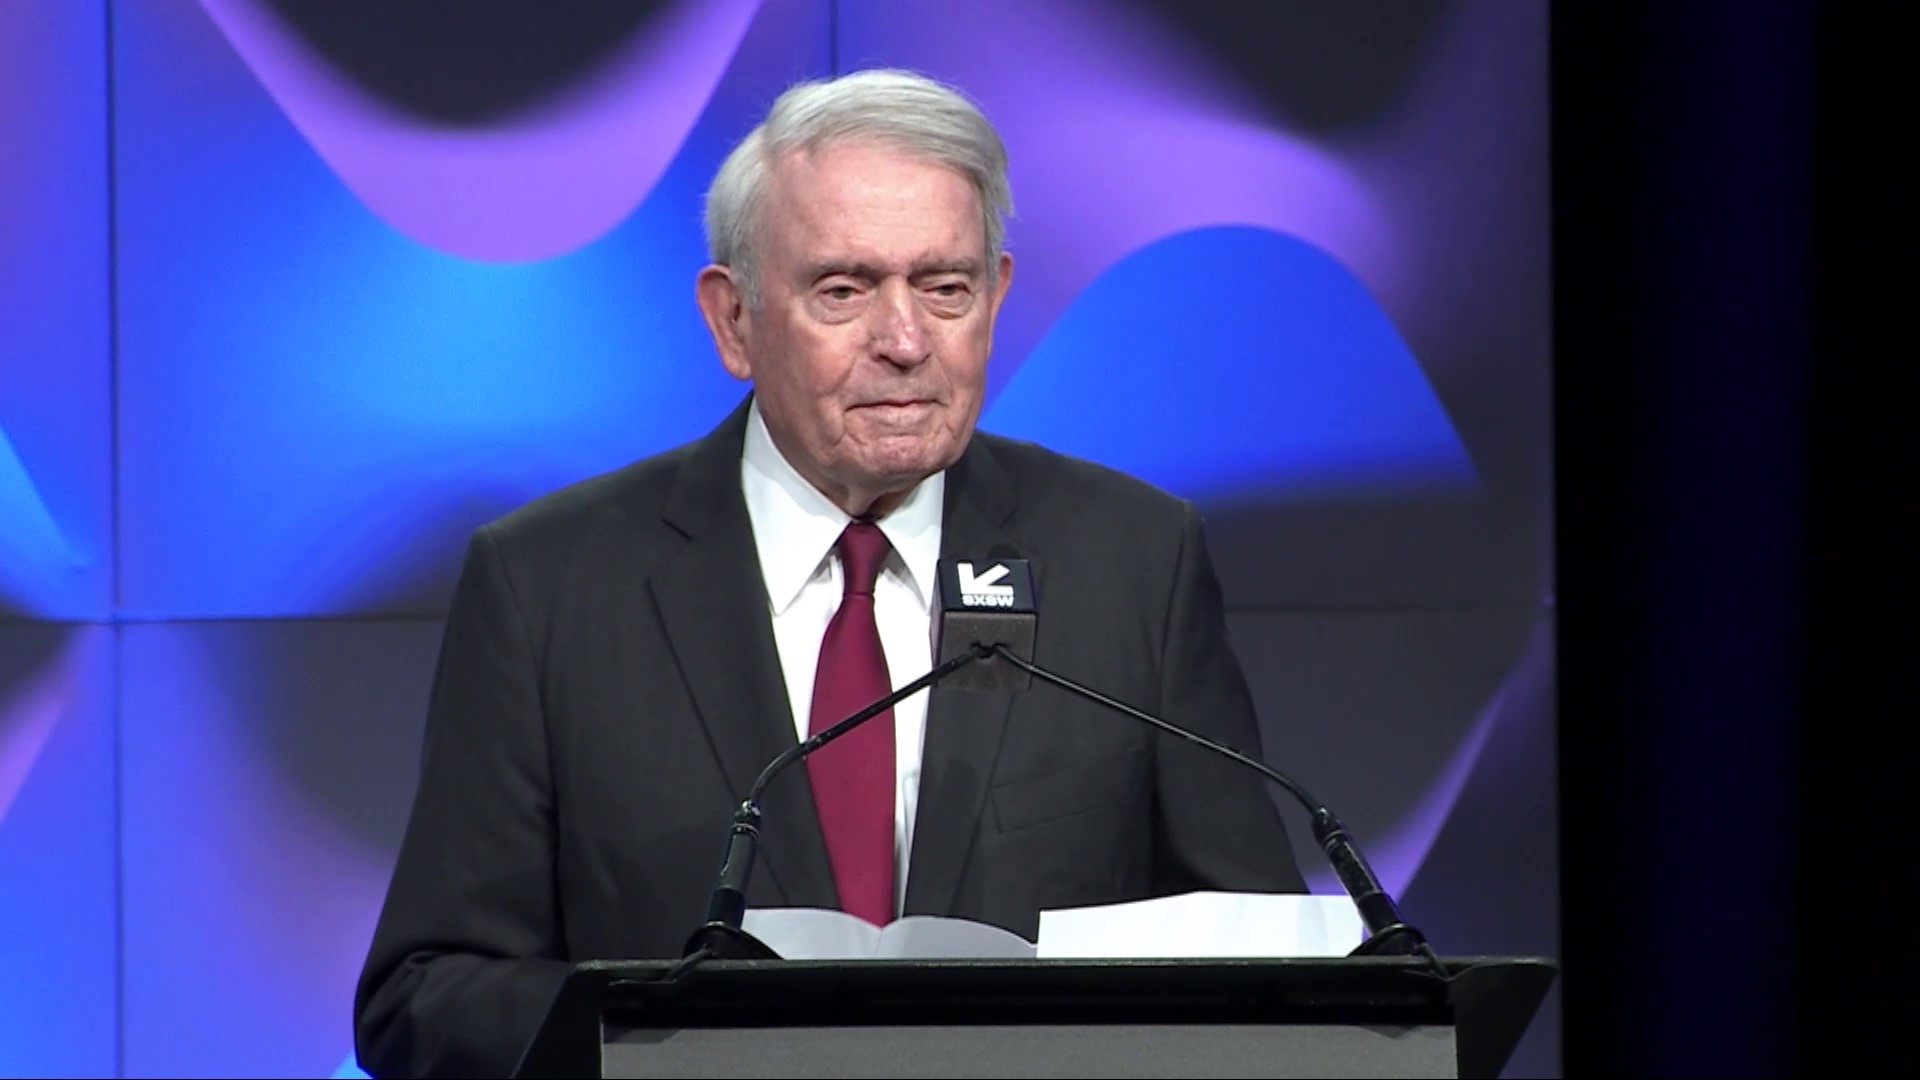 Iconic journalist and native Texan Dan Rather was inducted into the SXSW Hall of Fame this week.